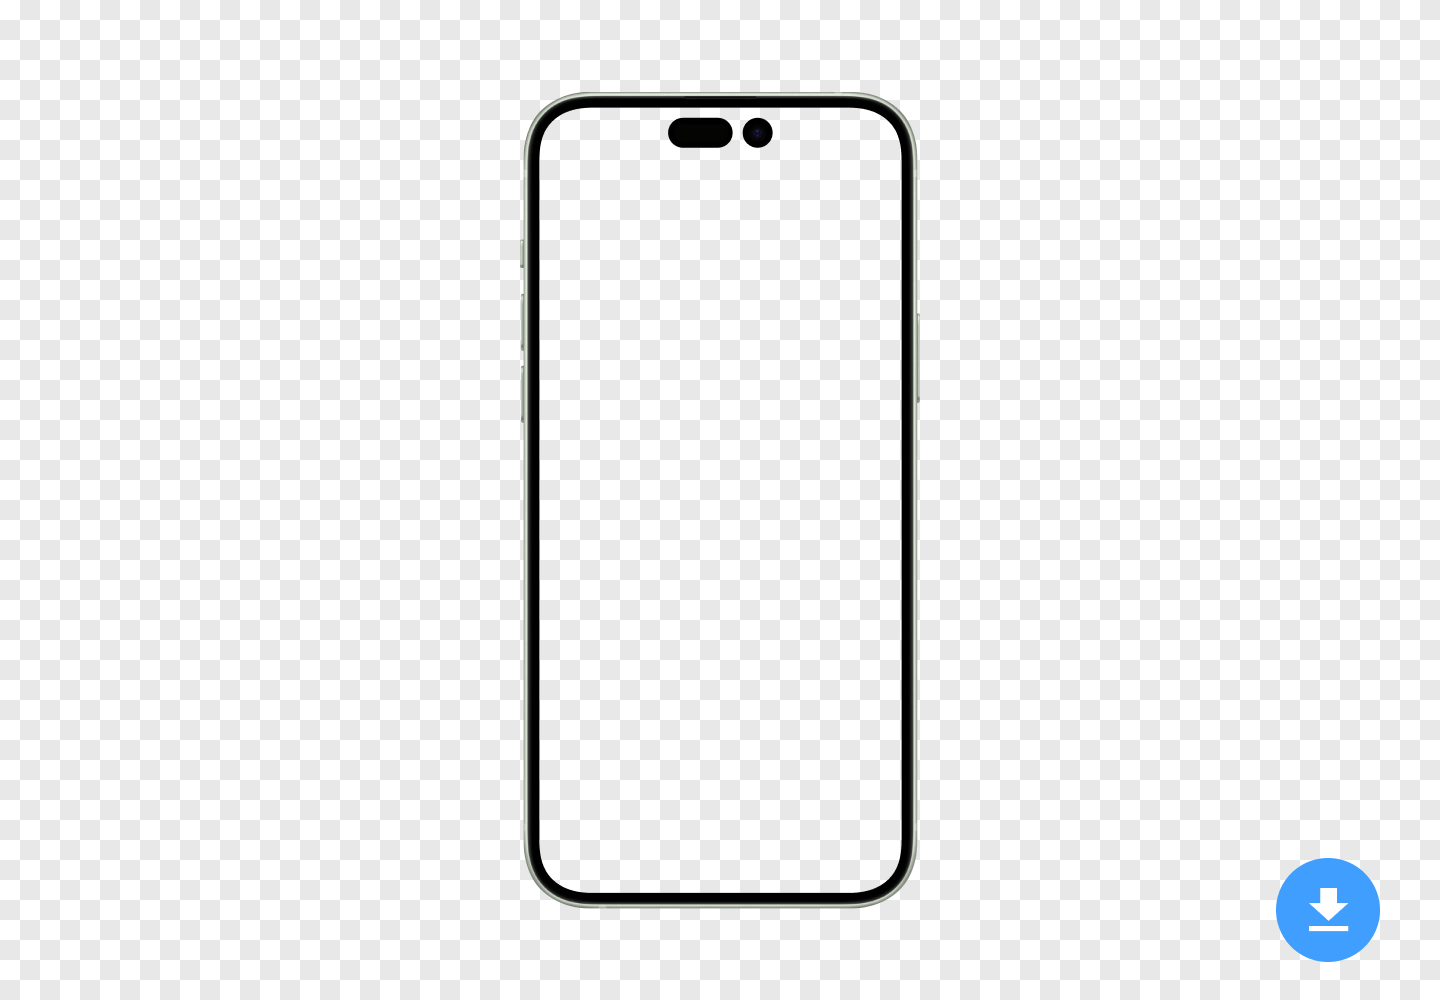 Free HD mockup of Apple iPhone 15 (2023) in PNG and PSD image format with transparent background